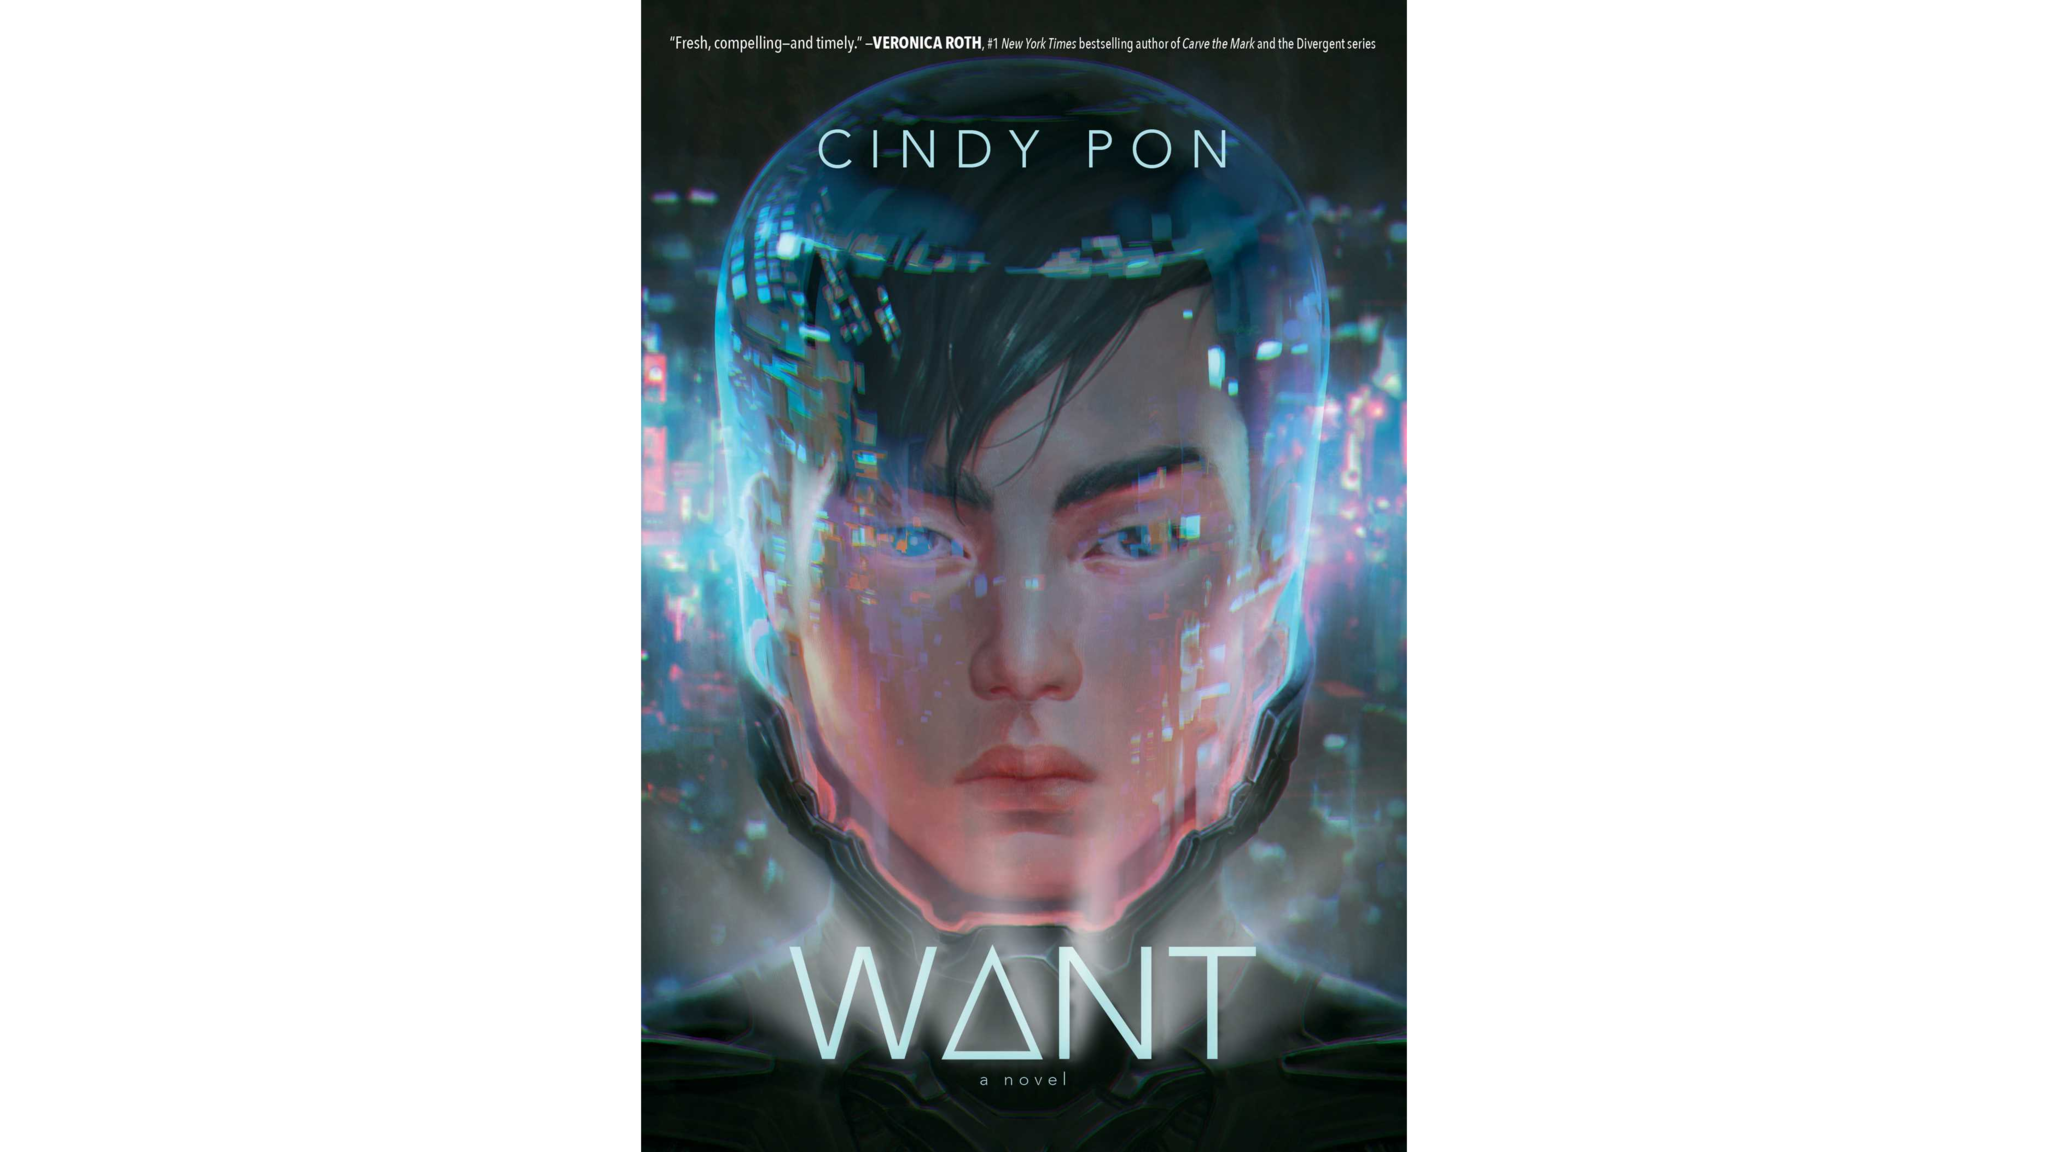 "Want" by Cindy Pon